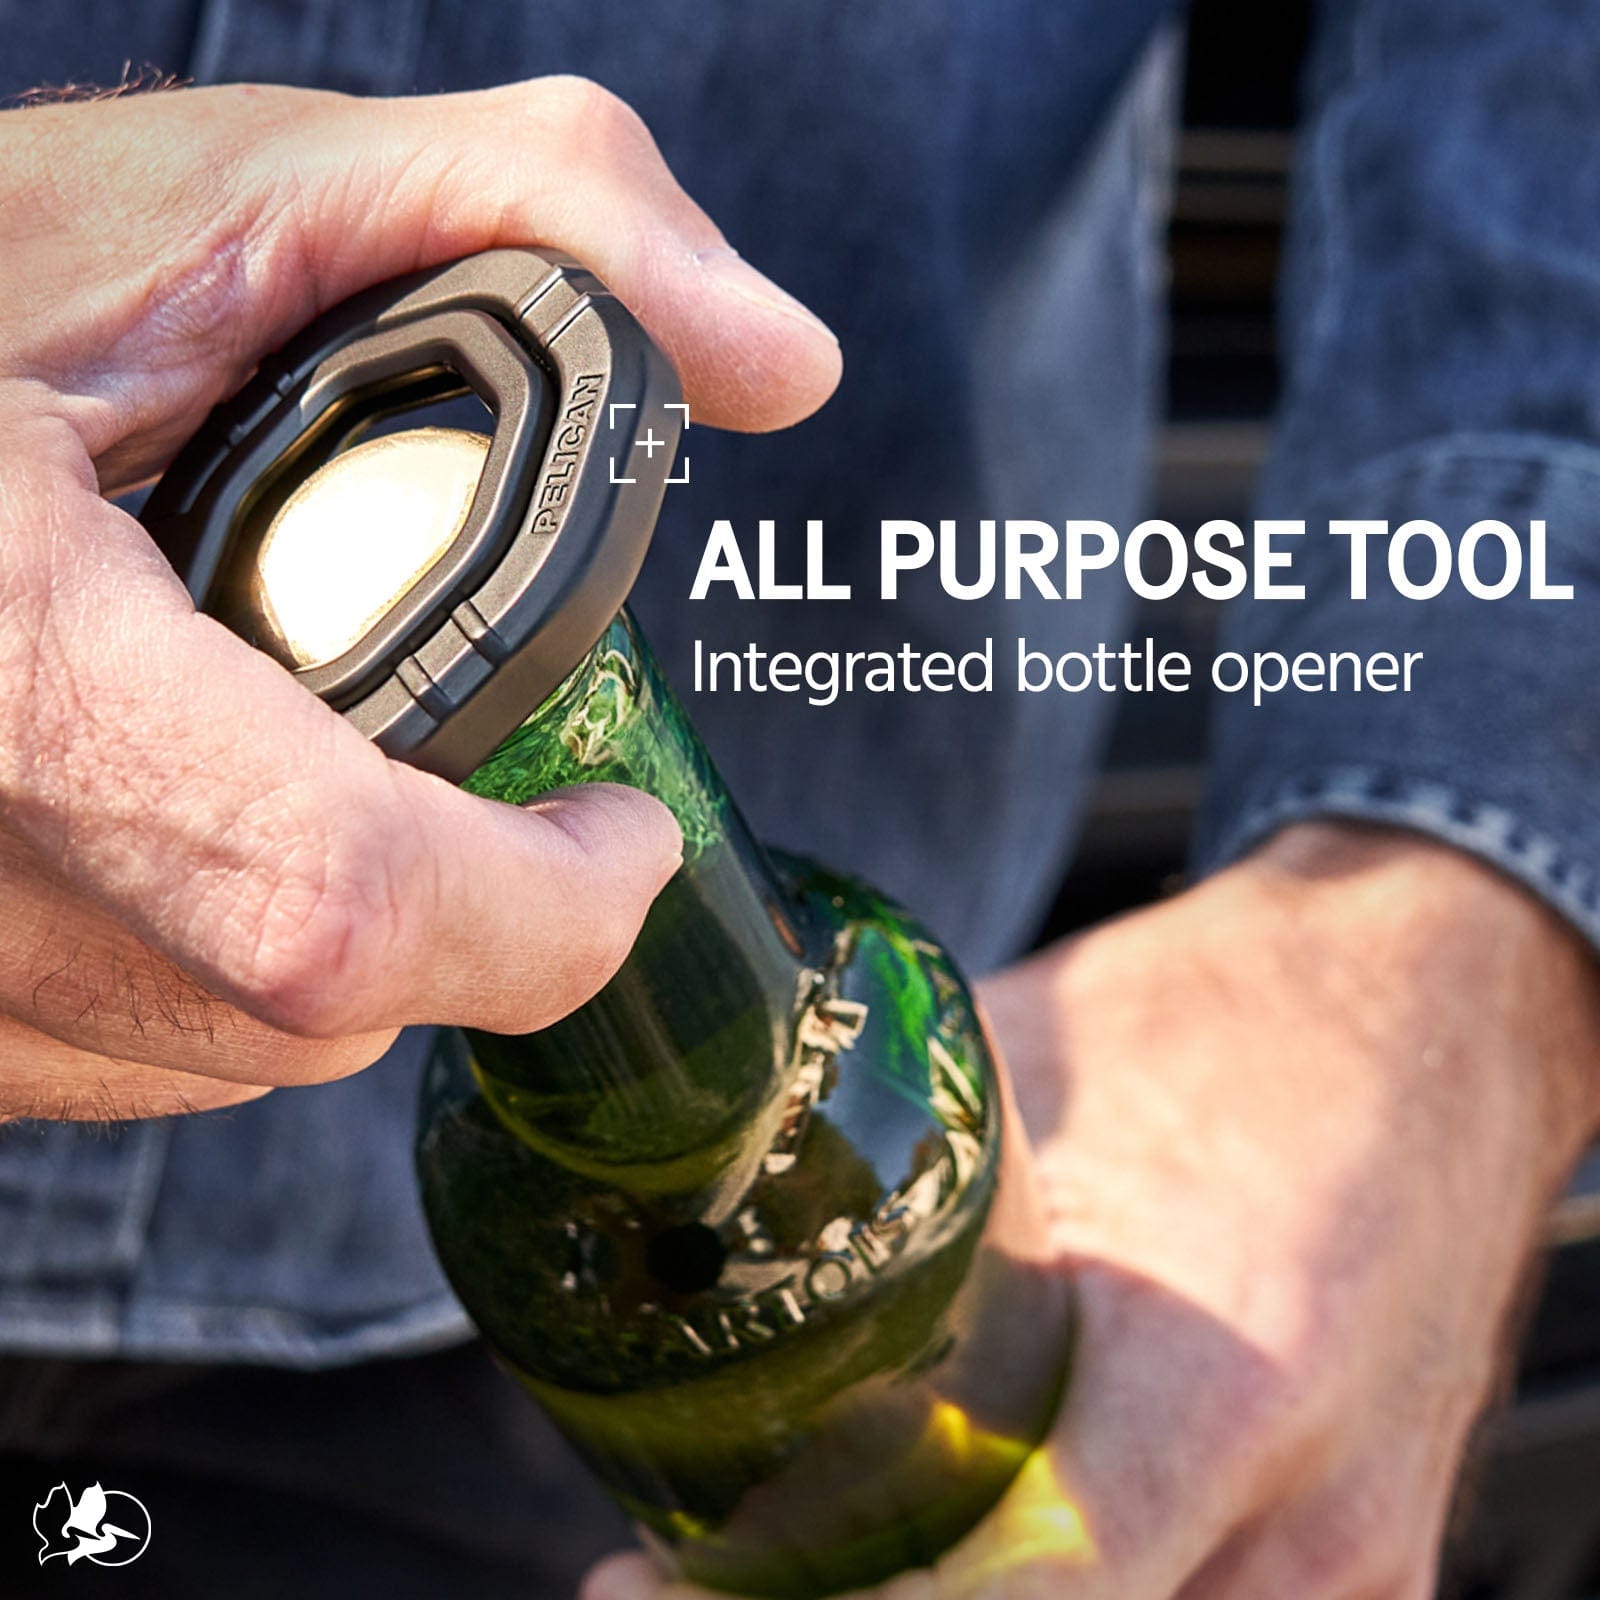 ALL PURPOSE TOOL. INTEGRATED BOTTLE OPENER